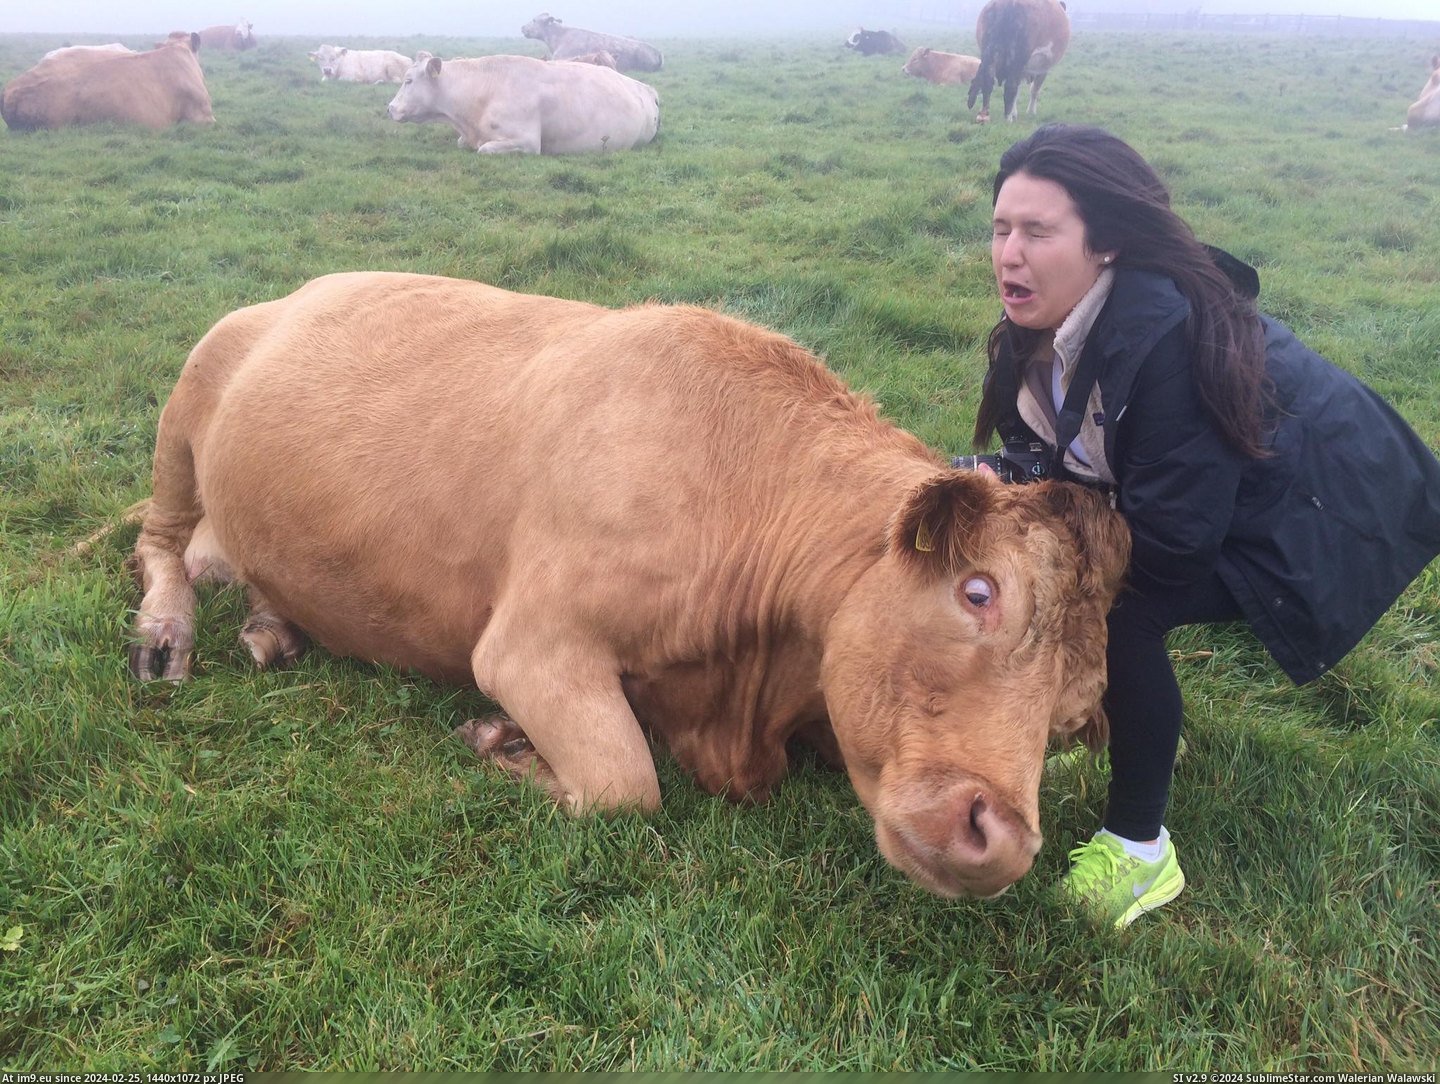 #Sister  #Cow [Pics] My sister getting headbutted by a cow Pic. (Изображение из альбом My r/PICS favs))